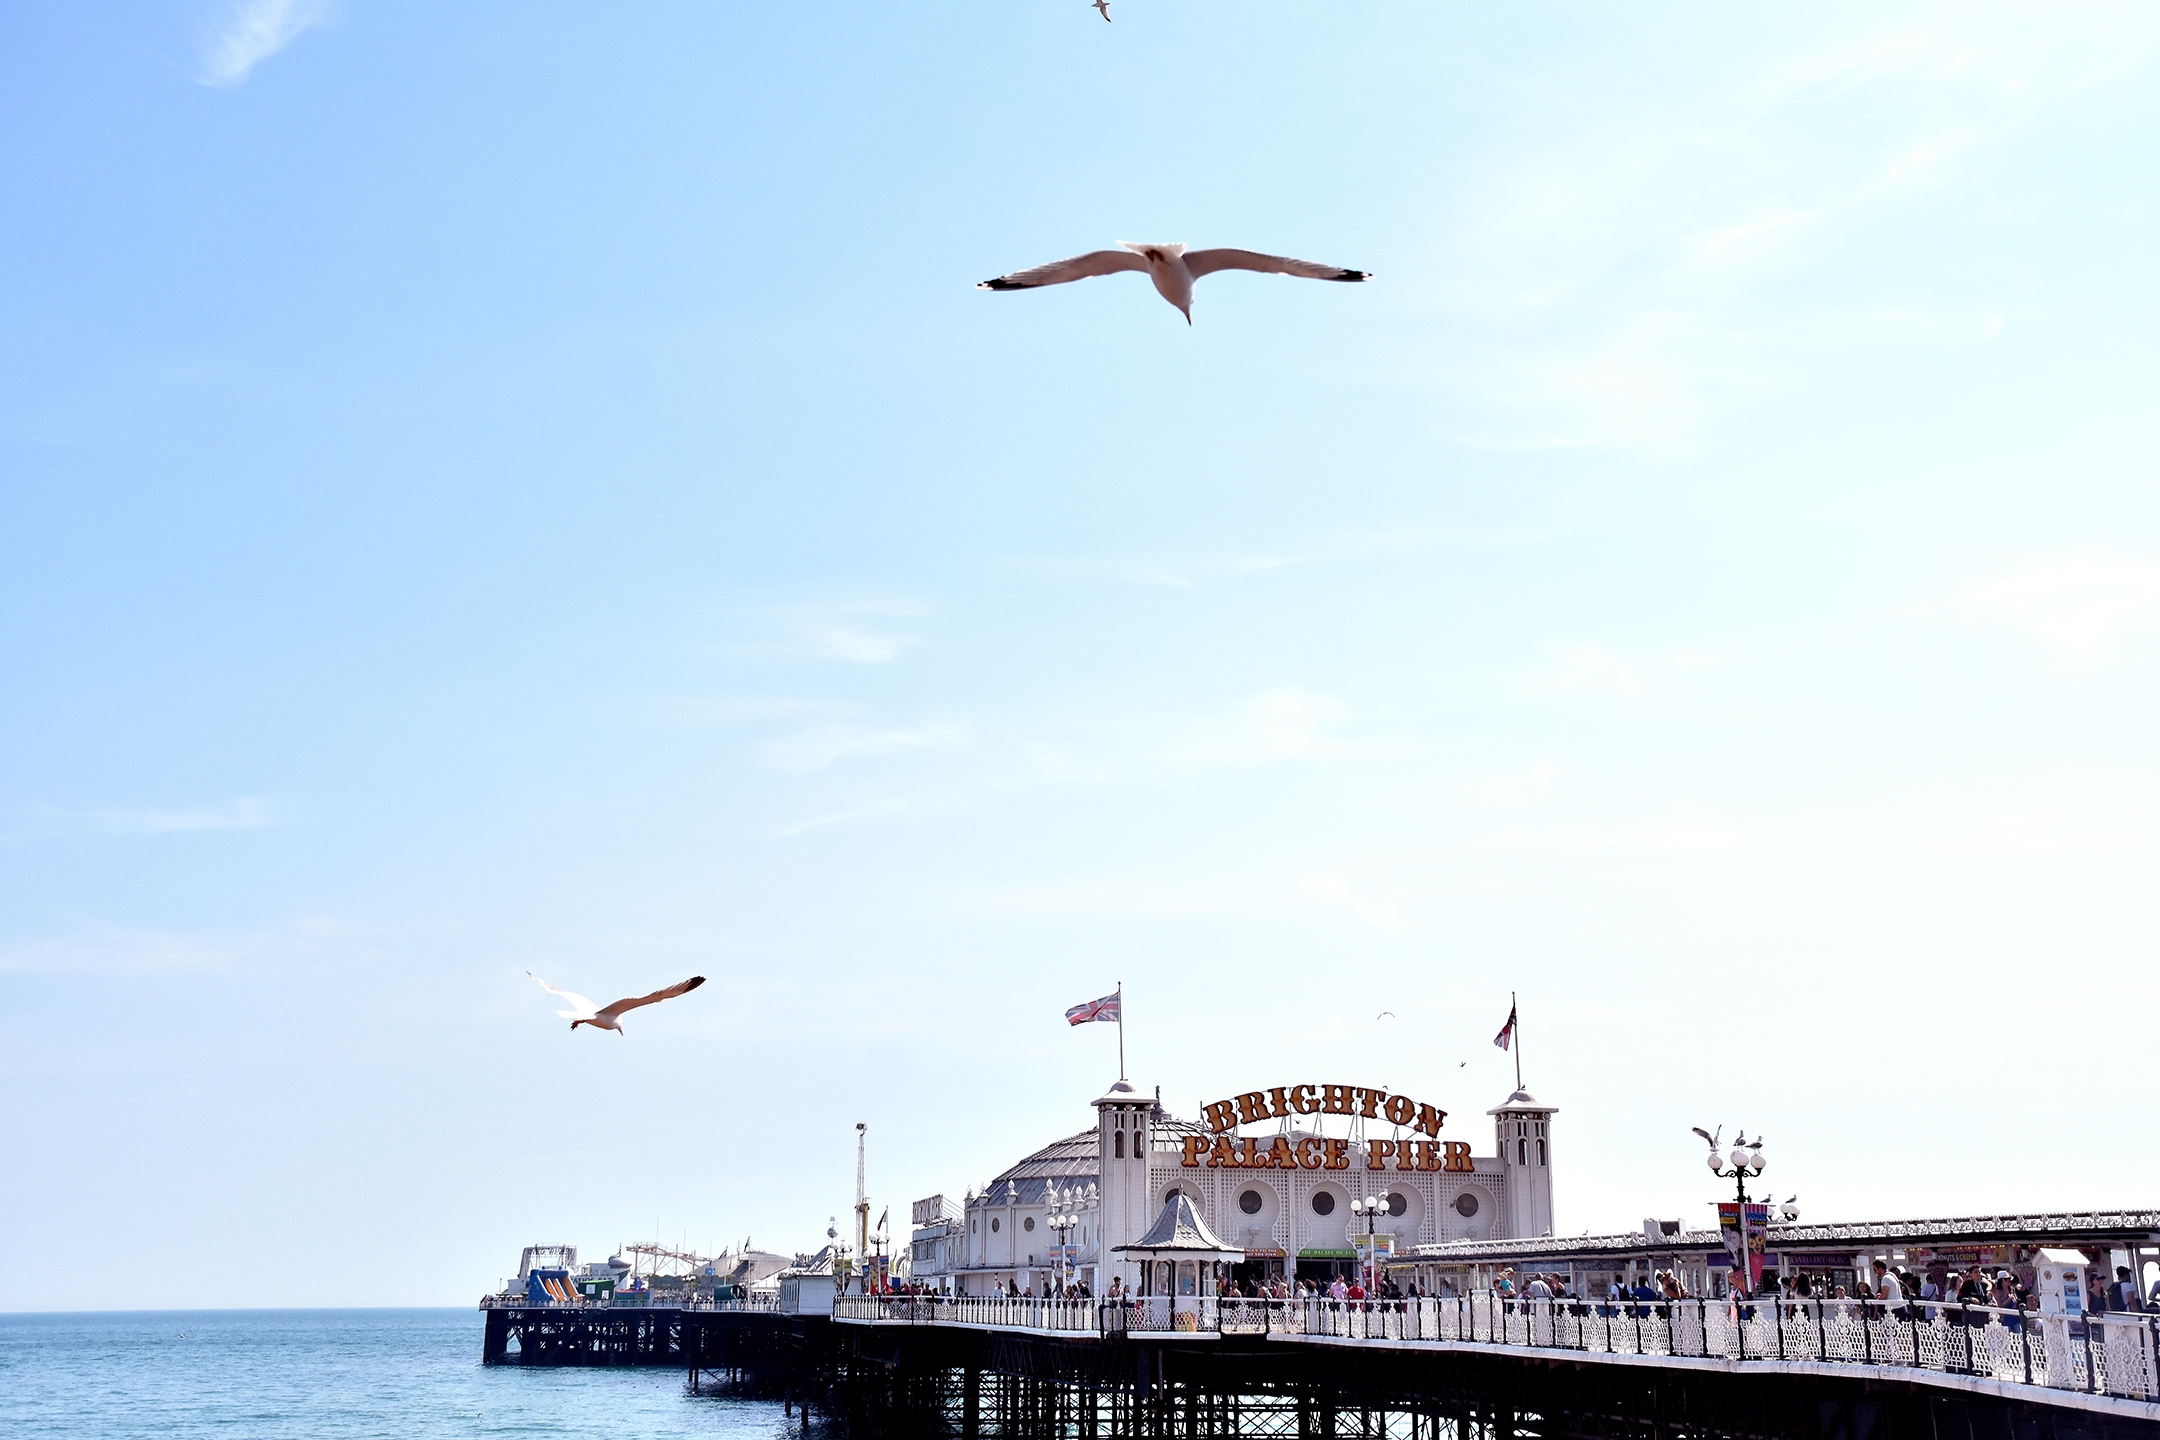 Seagulls flying over the Brighton pier in England